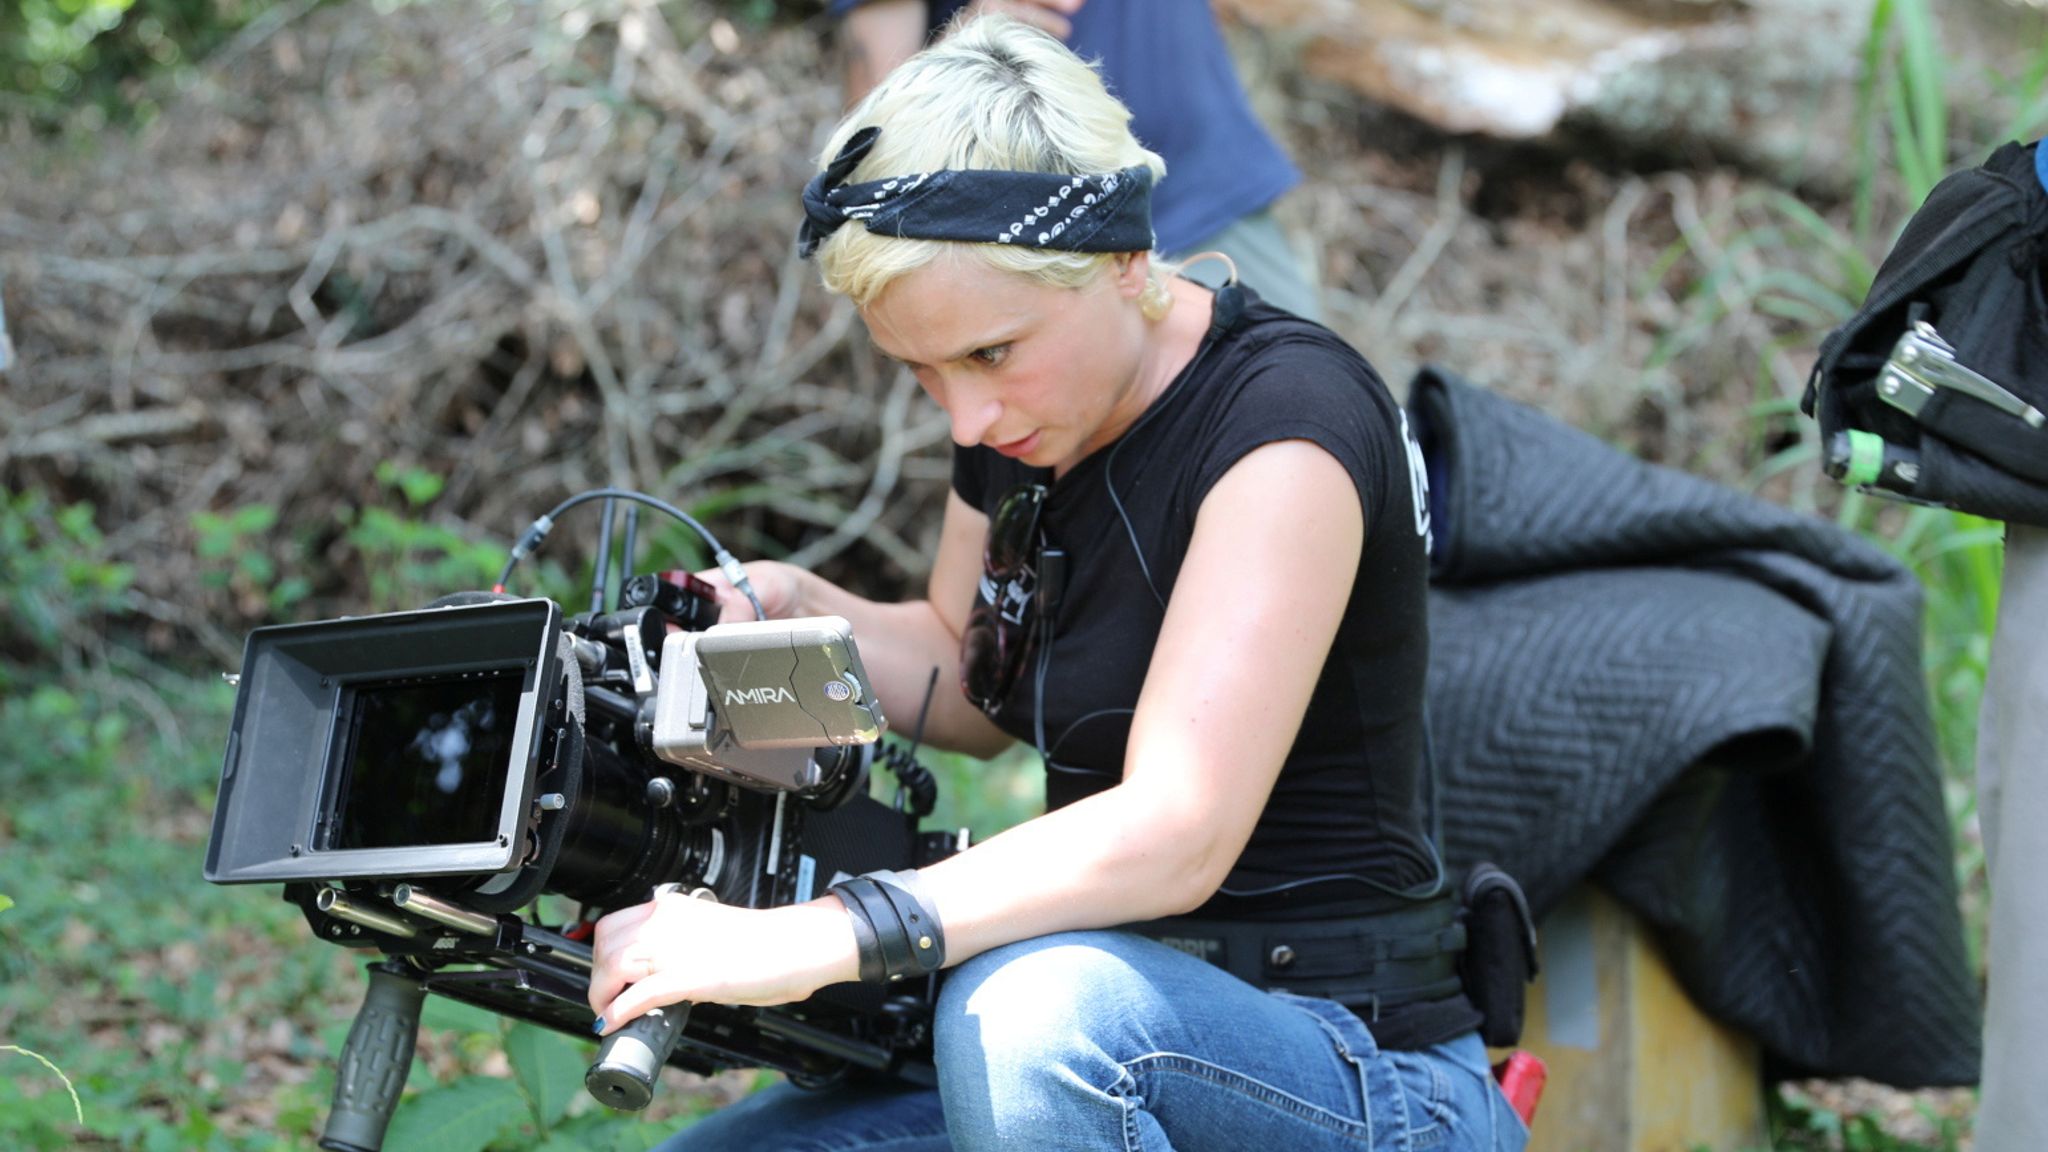 Cinematographer Halyna Hutchins was killed in a shooting on the set of the western film Rust. Pic: Swen Studios/ Reuters